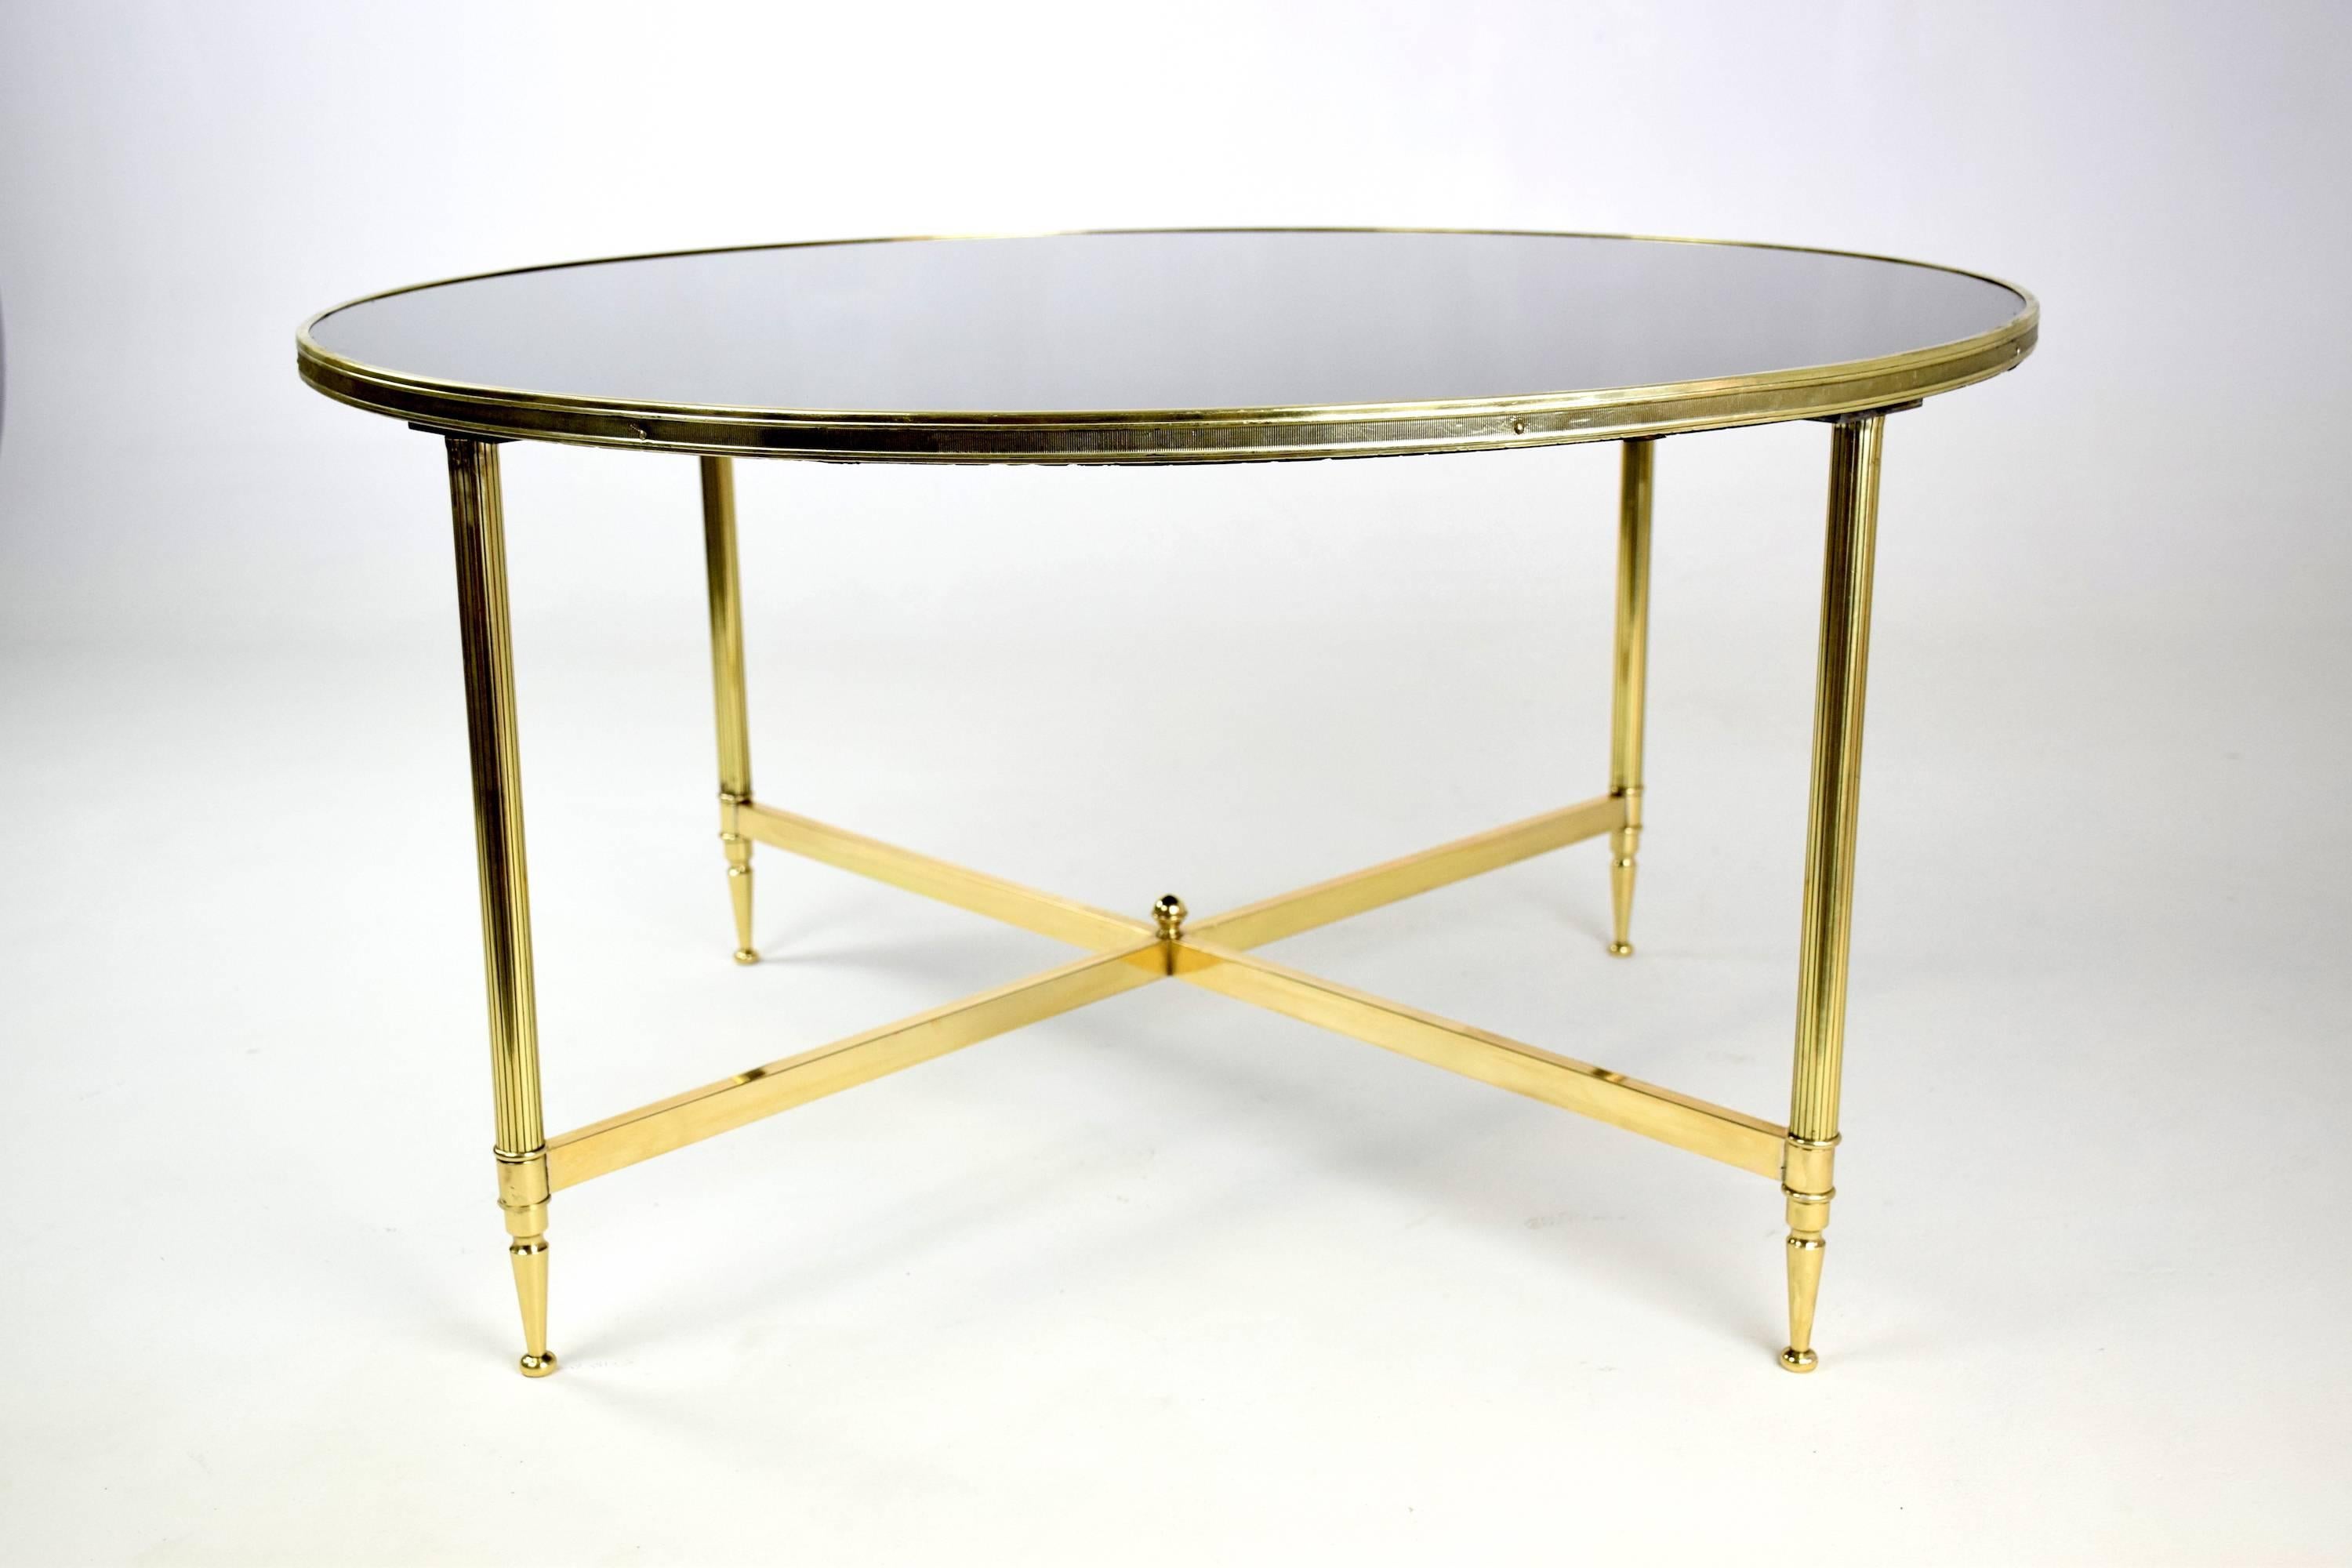 Polished French Brass Midcentury Coffee Table Attributed to Maison Jansen, 1970s